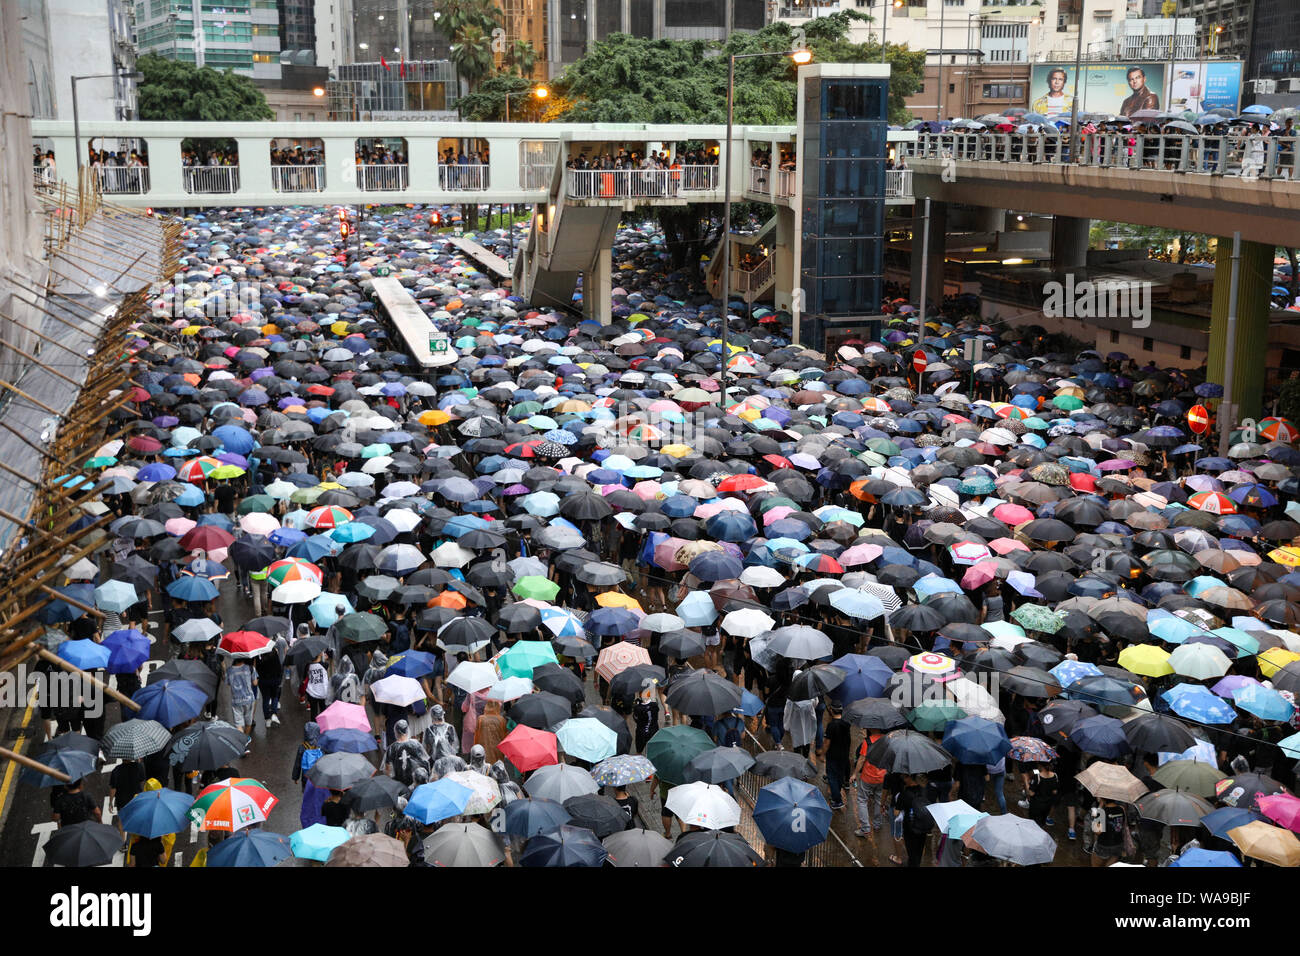 Hong Kong. 18th Aug, 2000. Huge number of protesters holding umbrellas on an unauthorized march during rain marching through the streets of Causeway Bay which organizers claim more than 1.7 million people attended. 18th August 2019 Credit: David Coulson/Alamy Live News Stock Photo